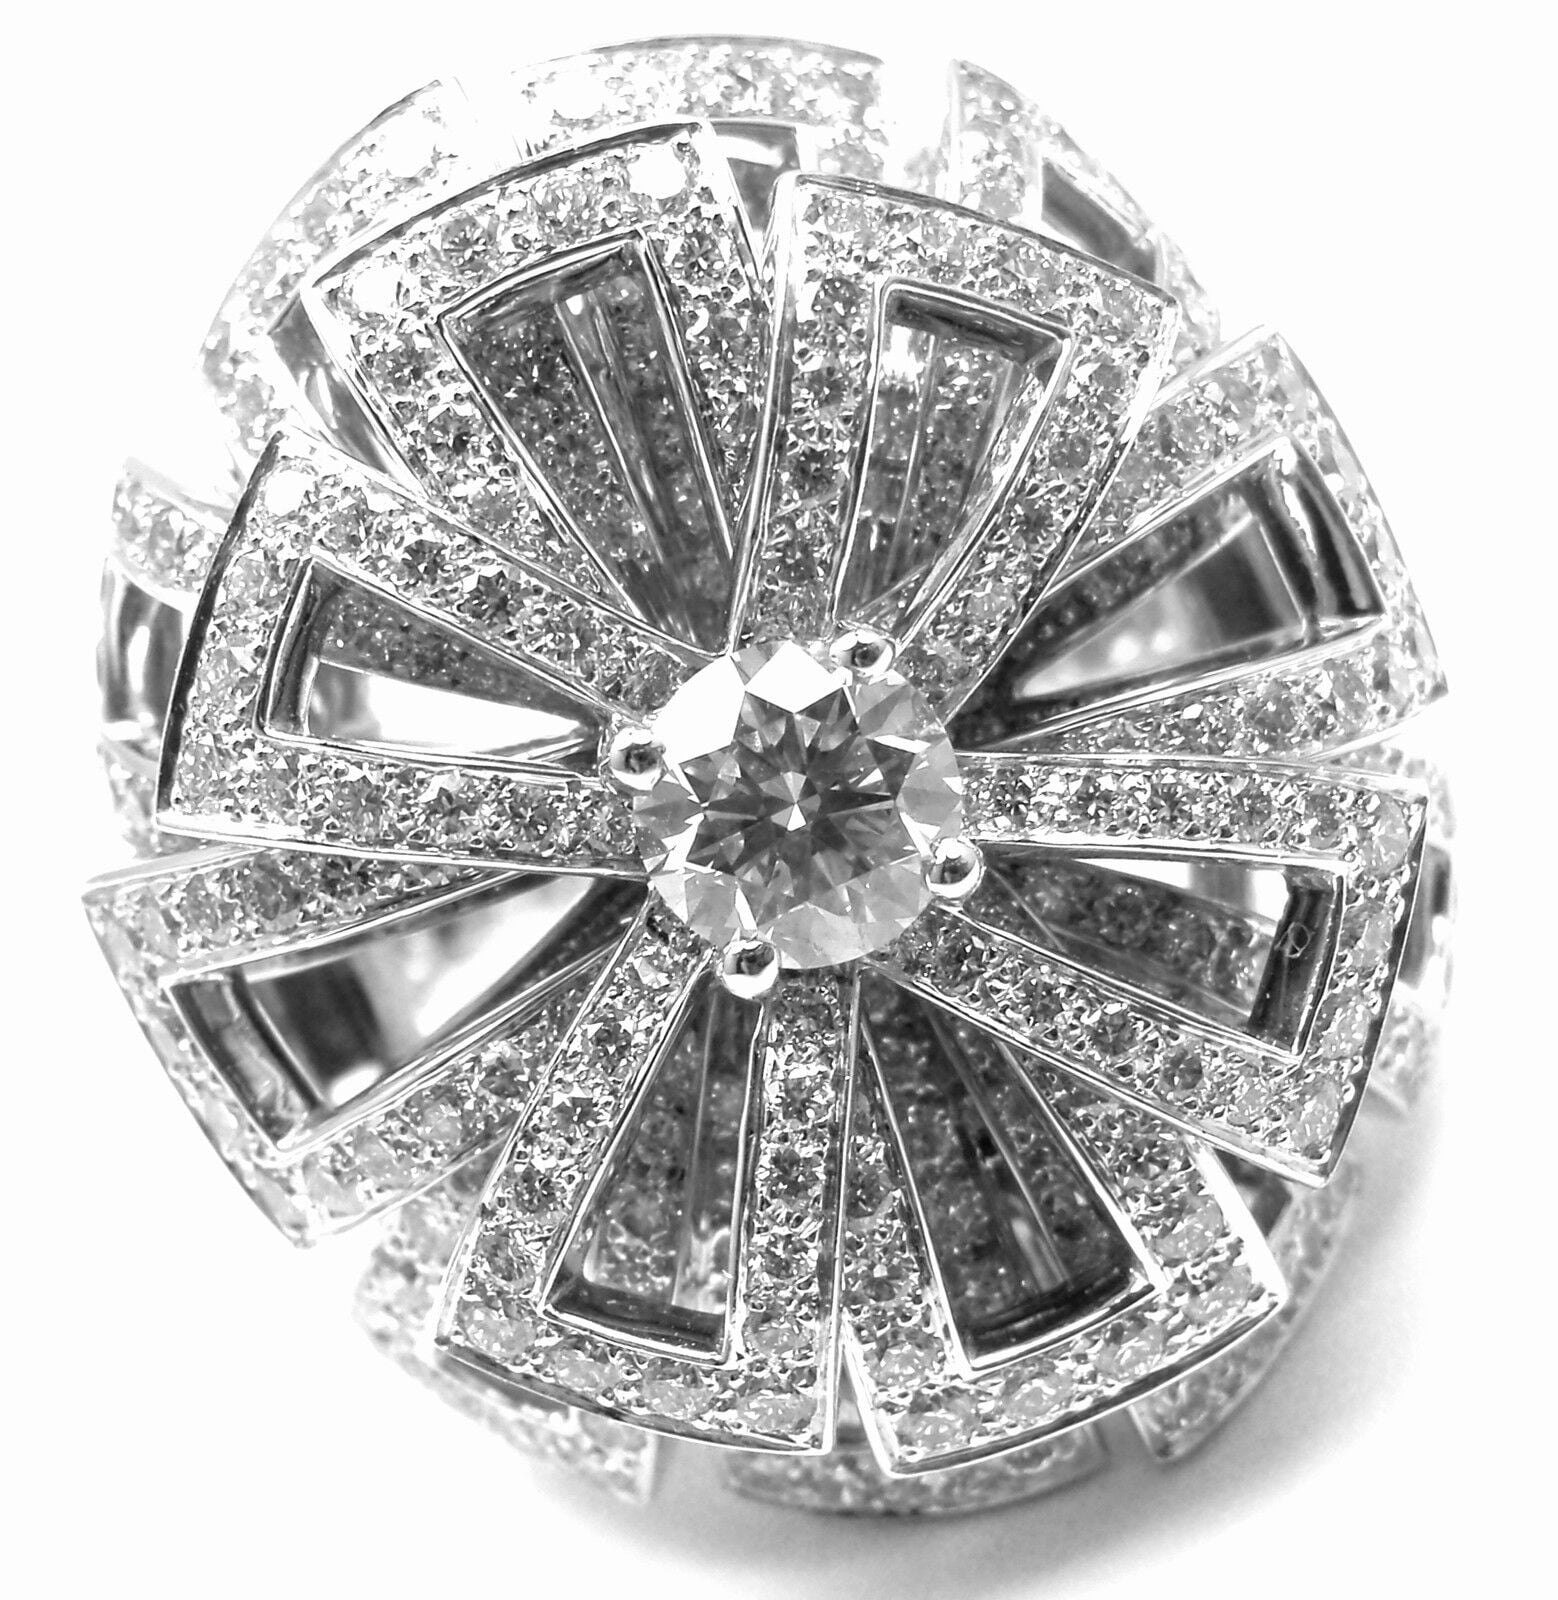 Authentic! Chanel Comete Star 18K White Gold Diamond Large Spinning Dome Ring